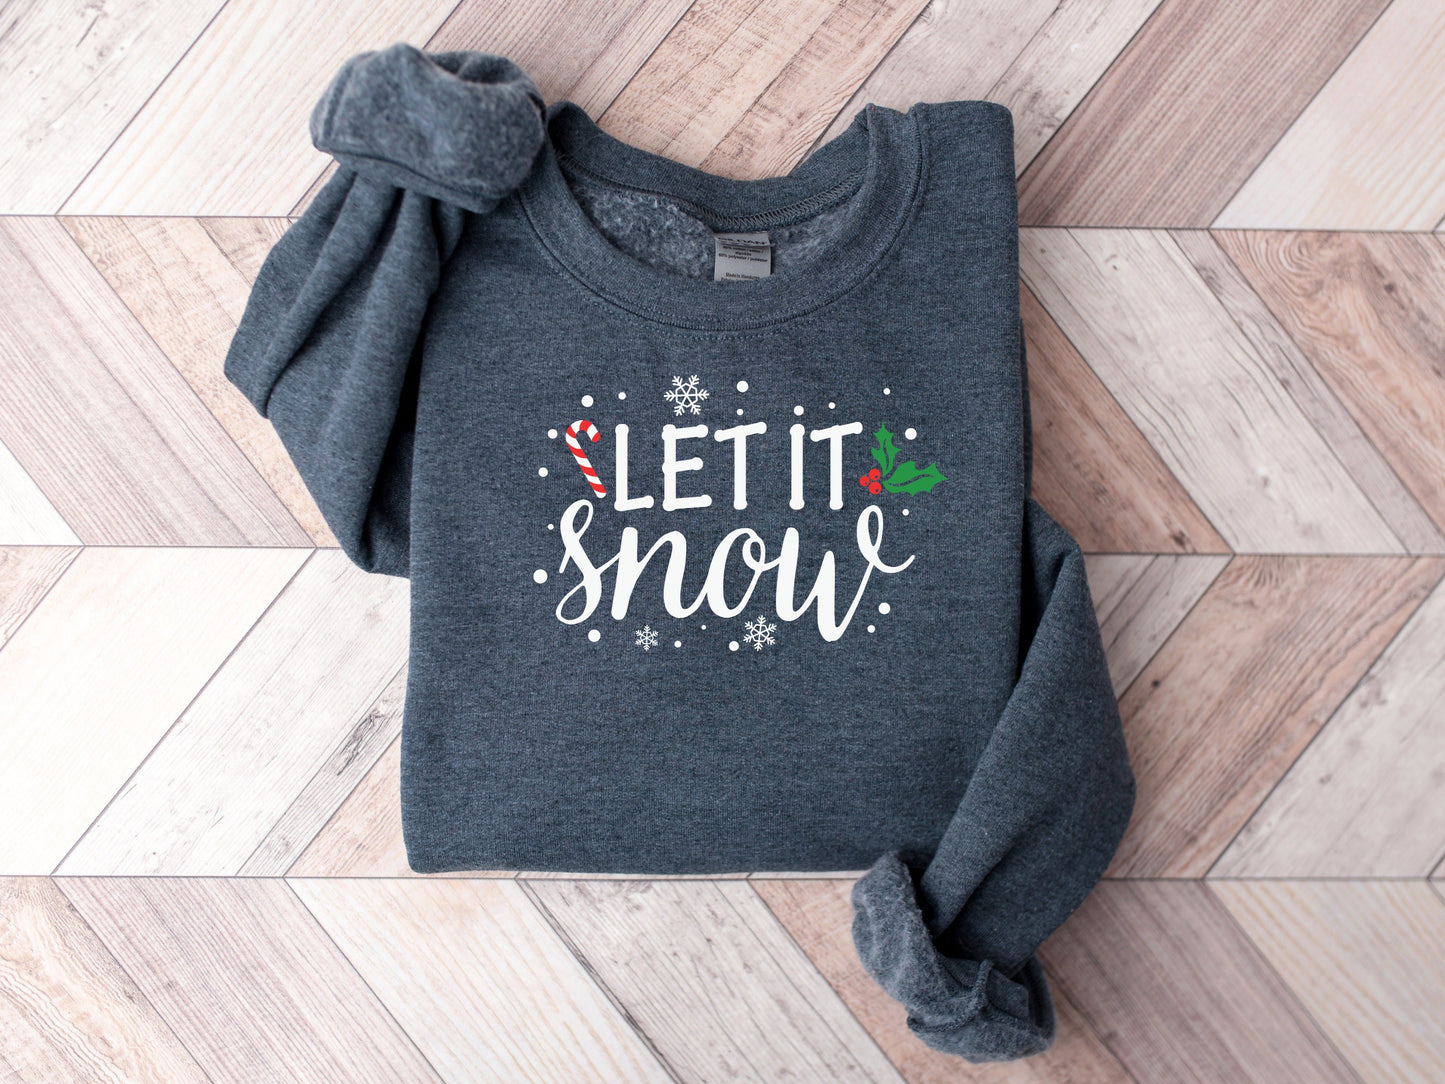 Let It Snow Sweatshirt, Christmas Shirt, Christmas Gift, Let It Snow, Christmas Sweatshirt, Christmas Outfit, Christmas Party Shirt